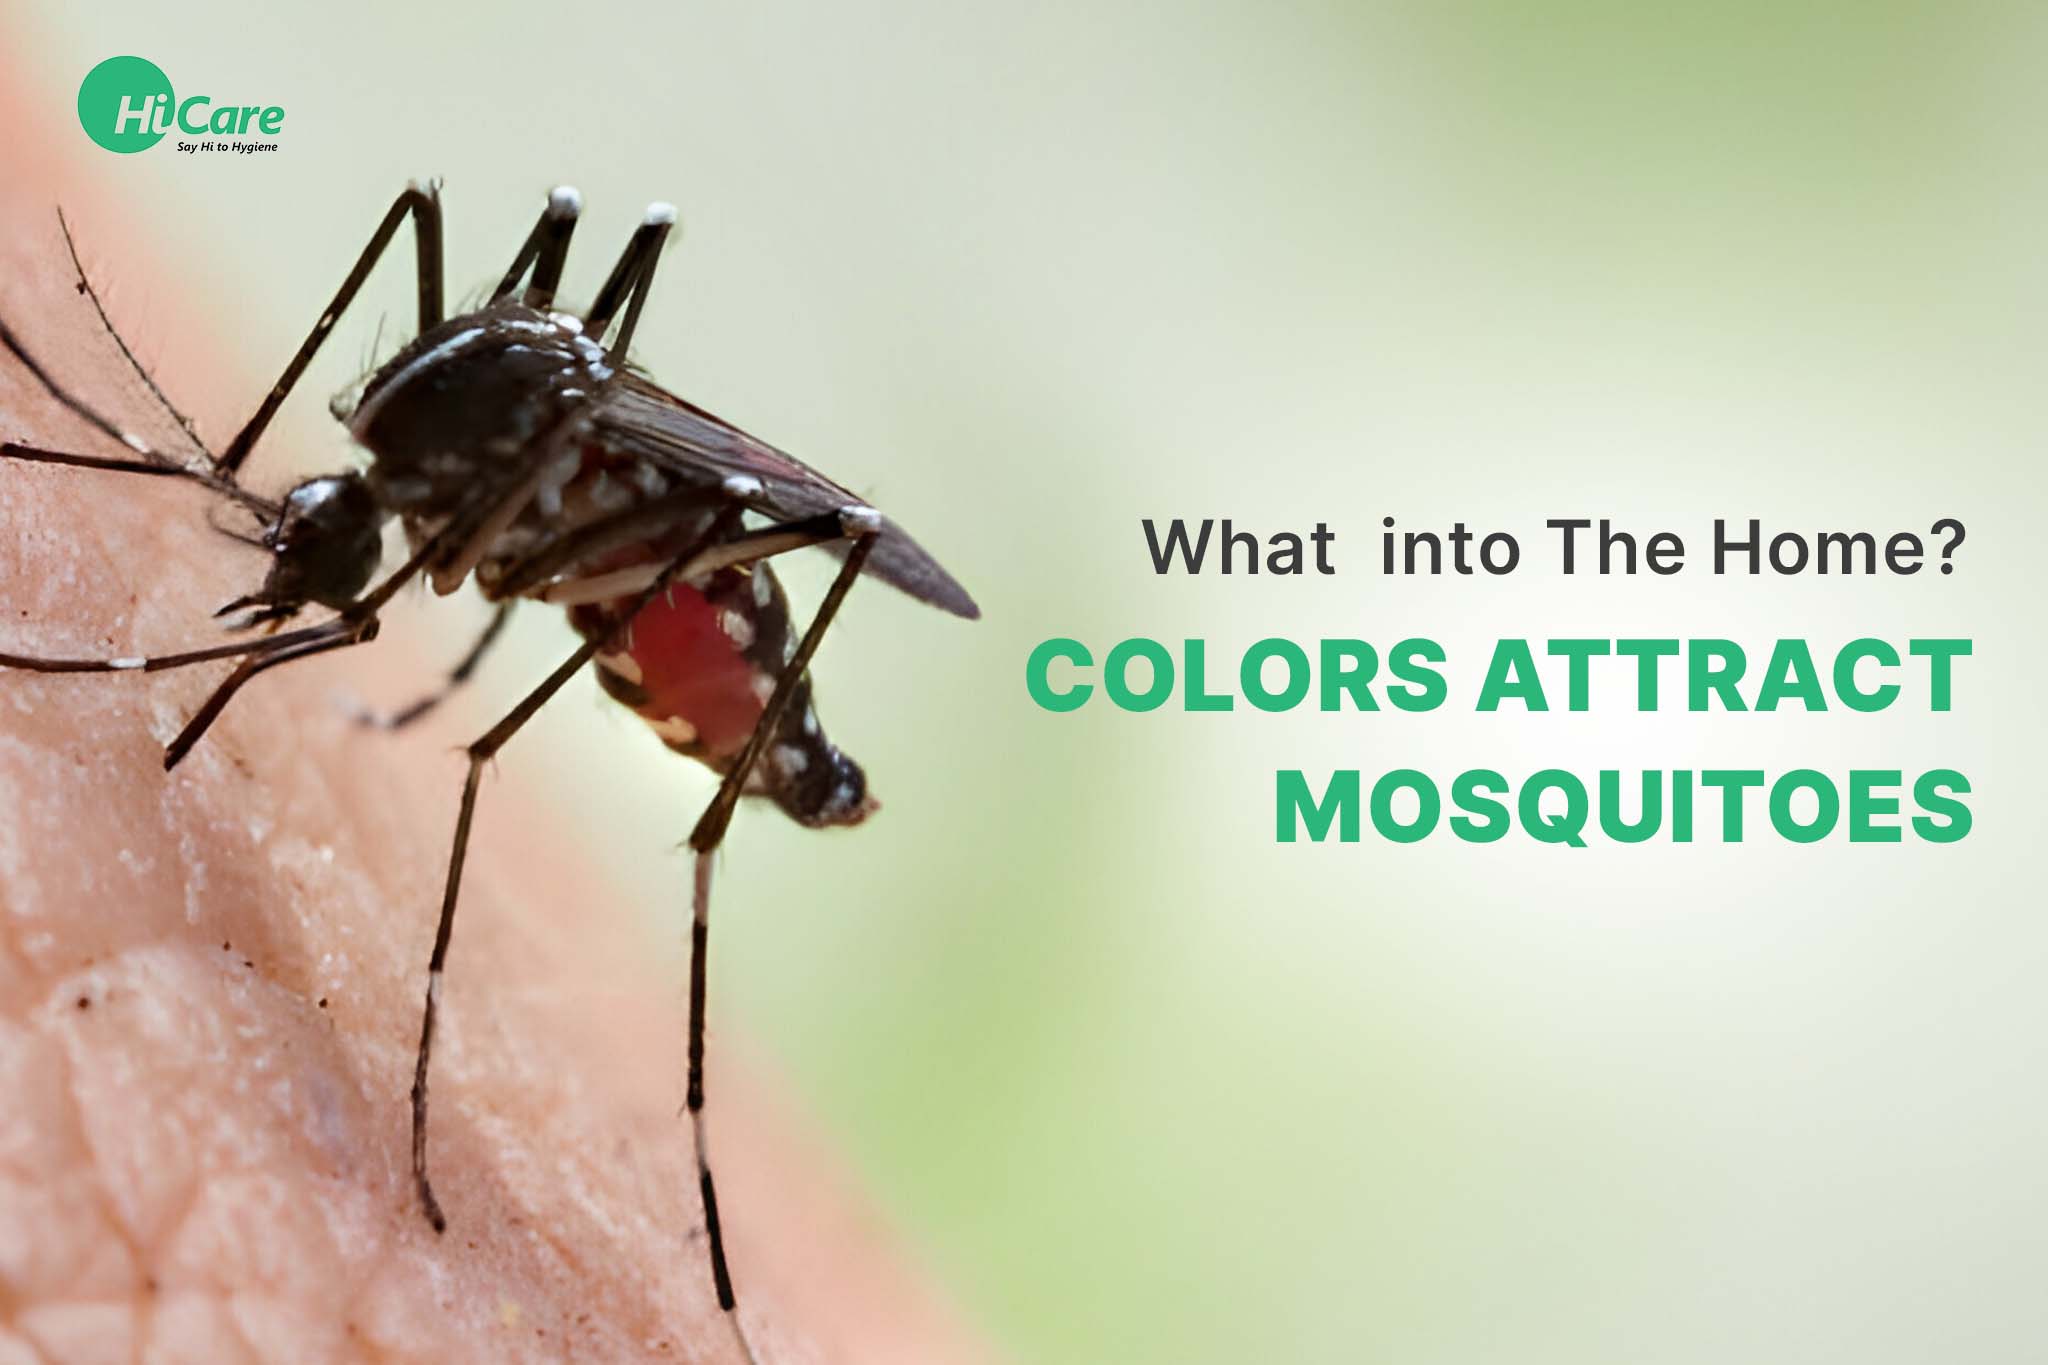 What Colors Attract Mosquitoes to The Home?